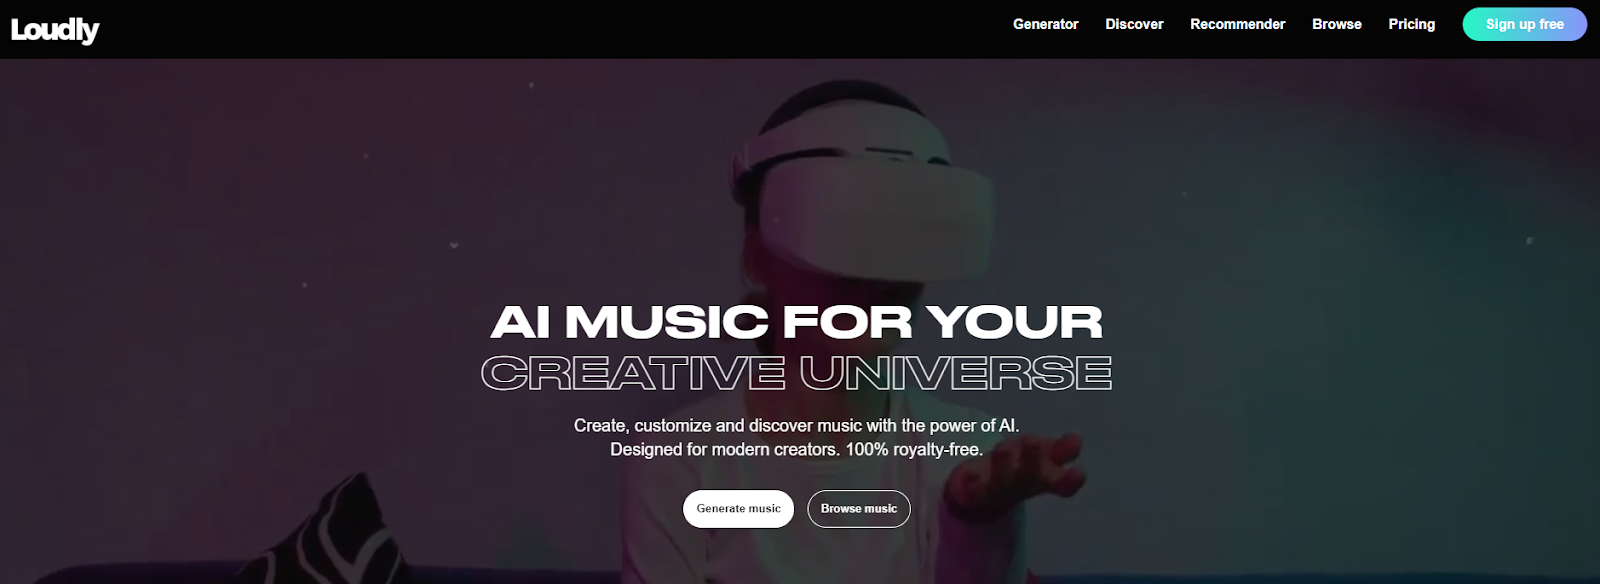 The homepage for Loudly AI music generator.